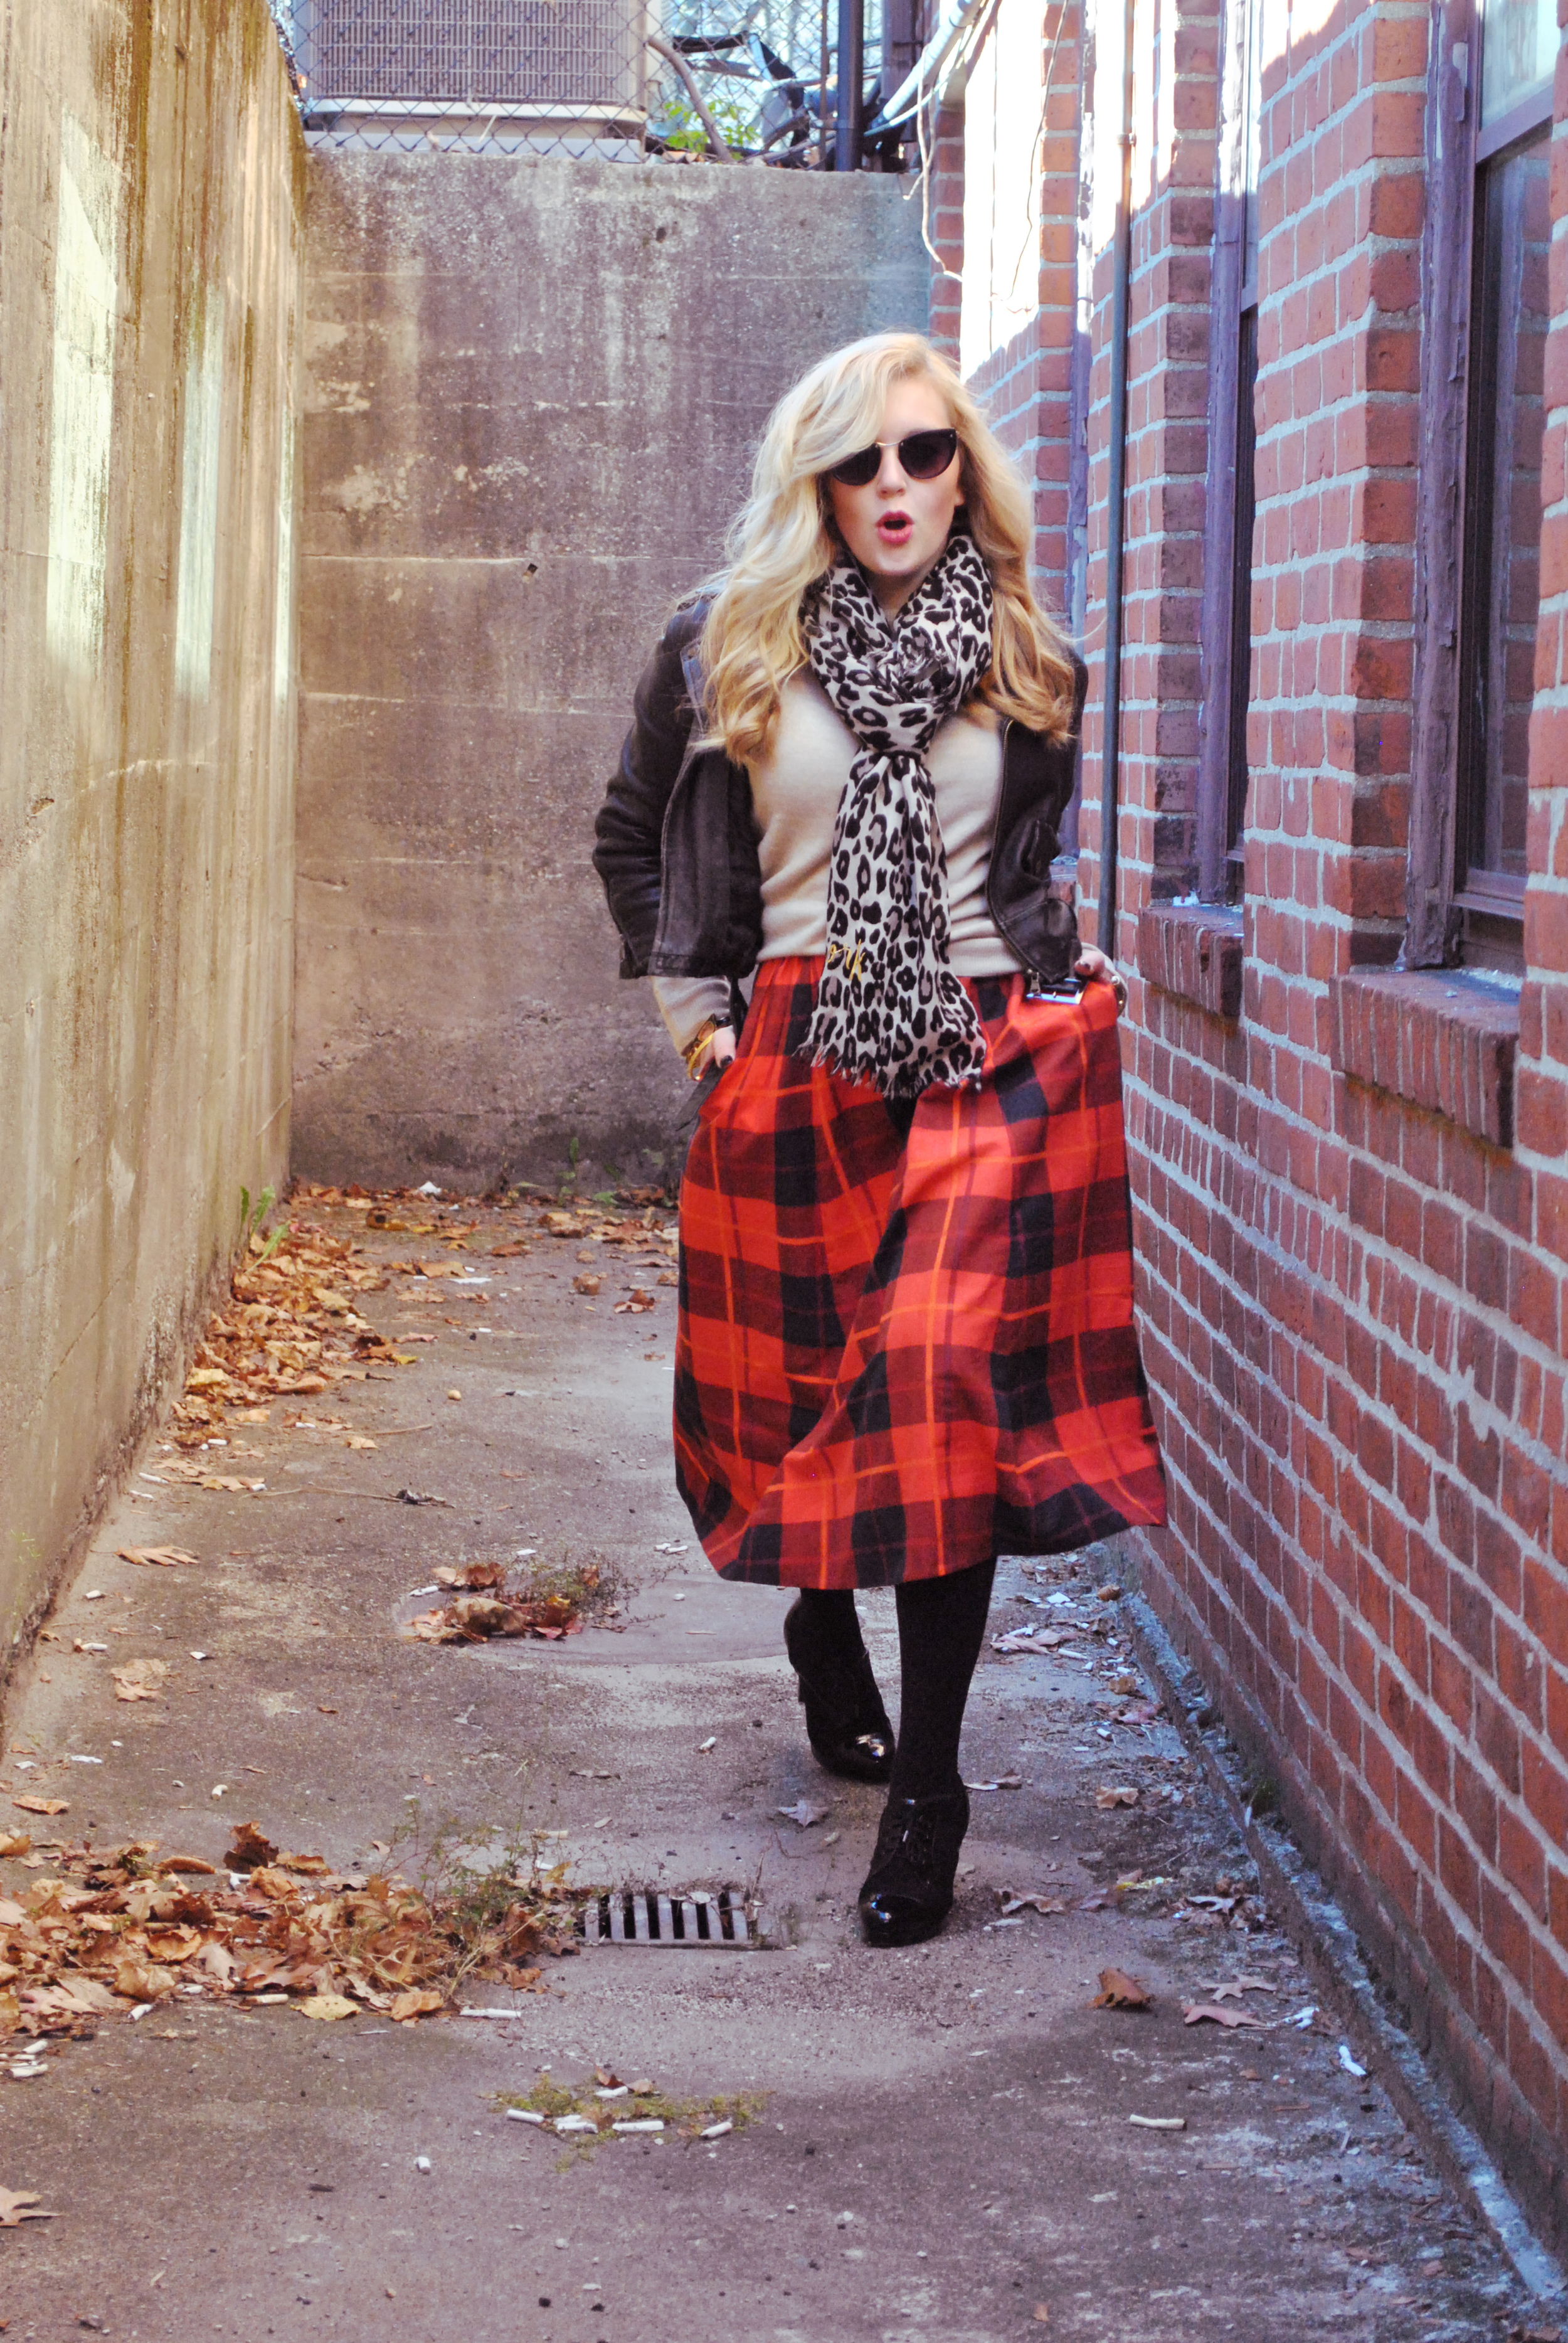 thoughtfulwish | kate spade // plaid skirt // camel // moto jacket // leopard print scarf // preppy outfit // rocker outfit